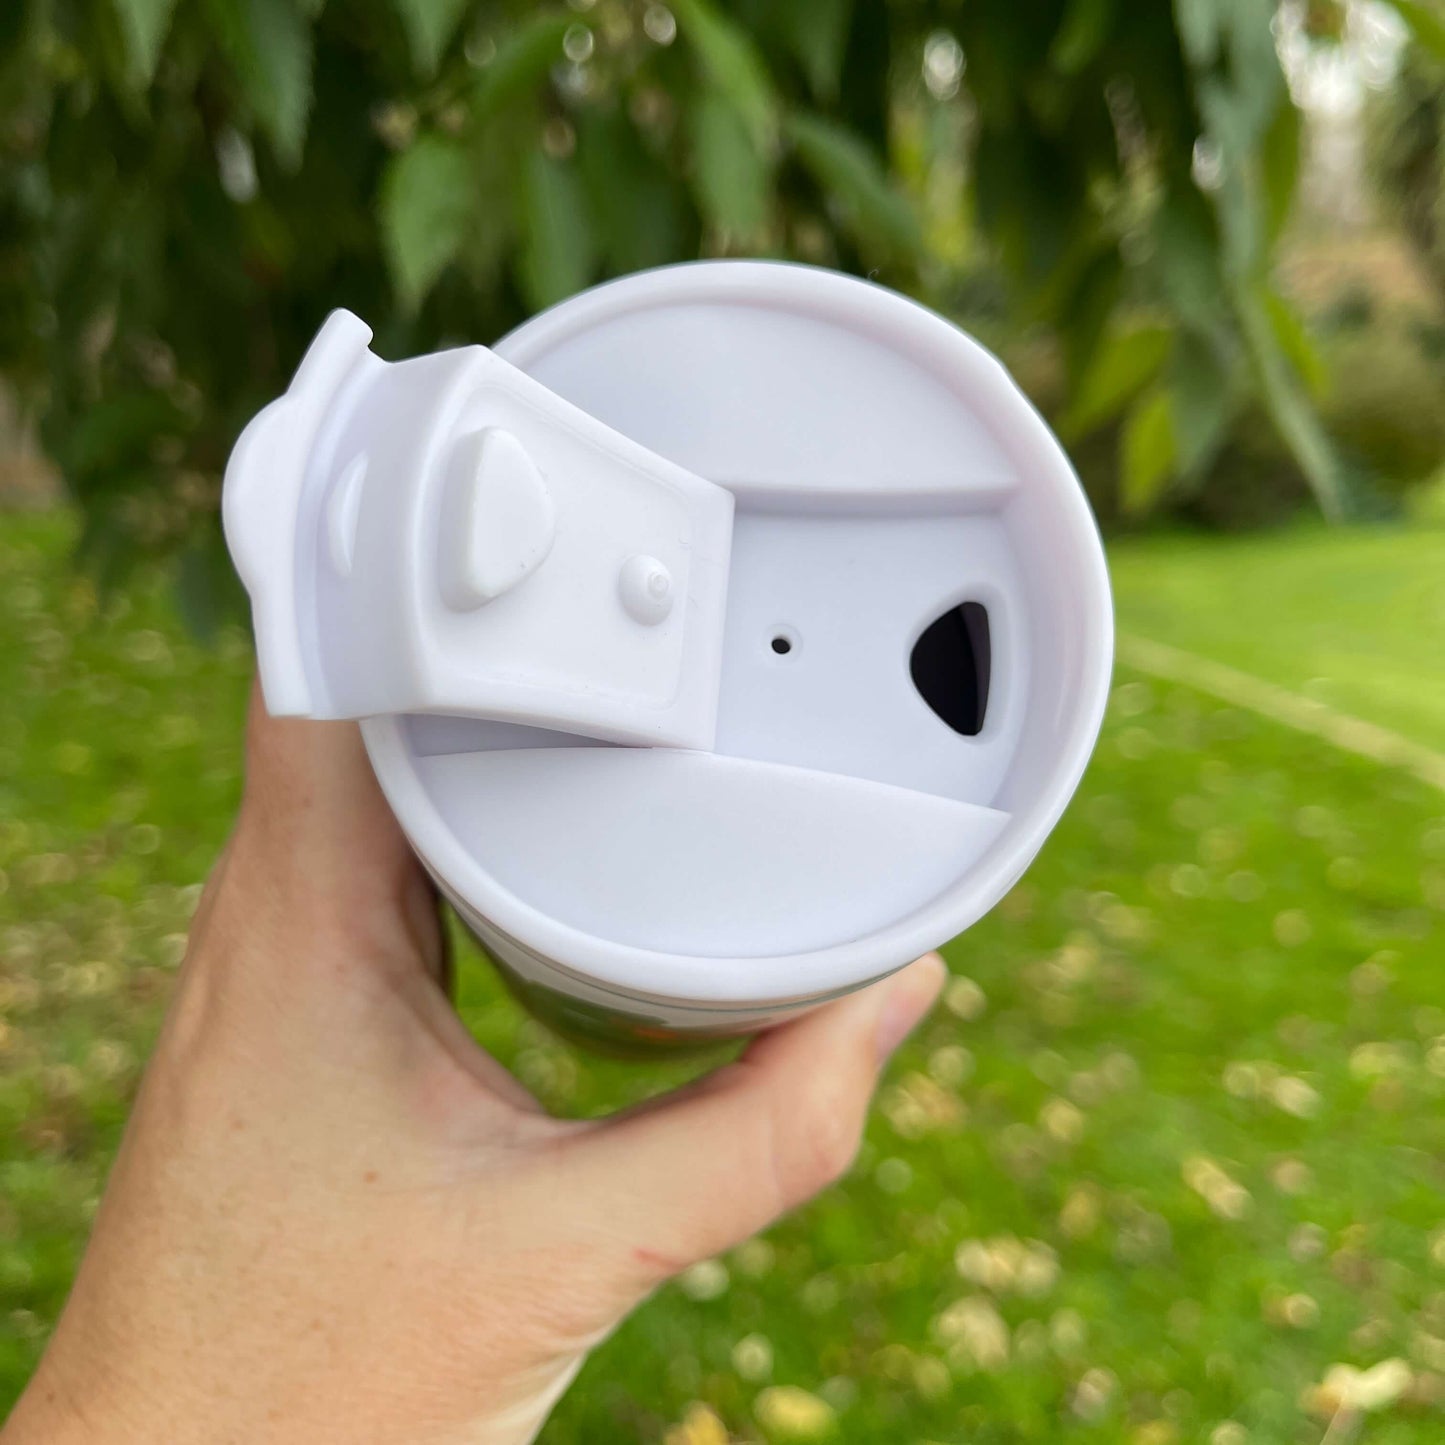 Birds eye view of an open white plastic sipper top for a reusable cup.